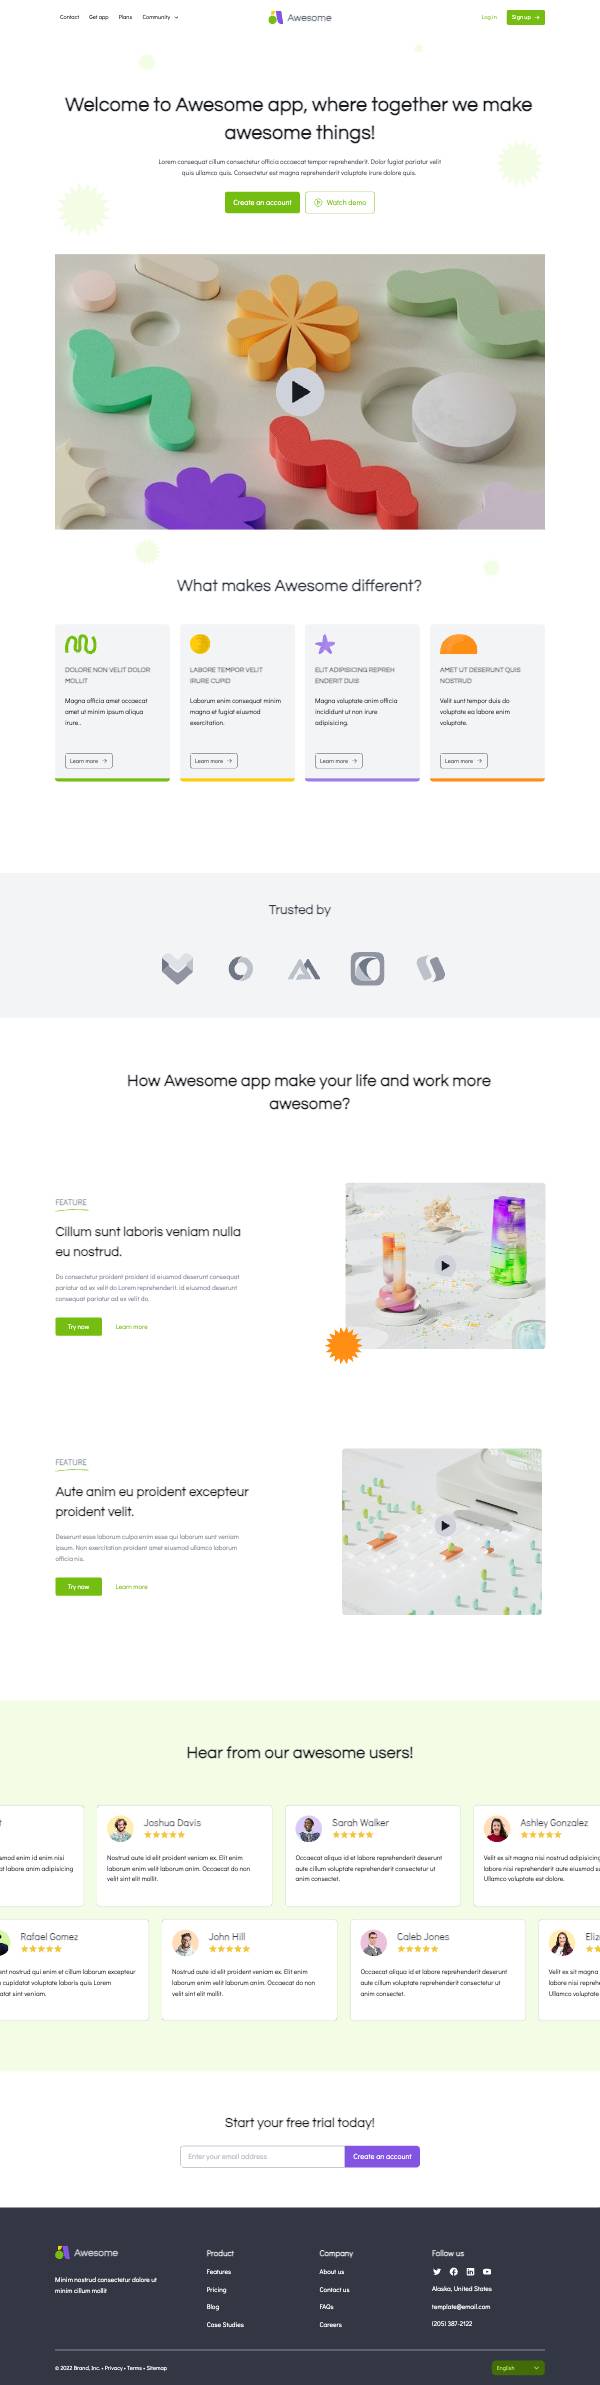 Home - Landing page